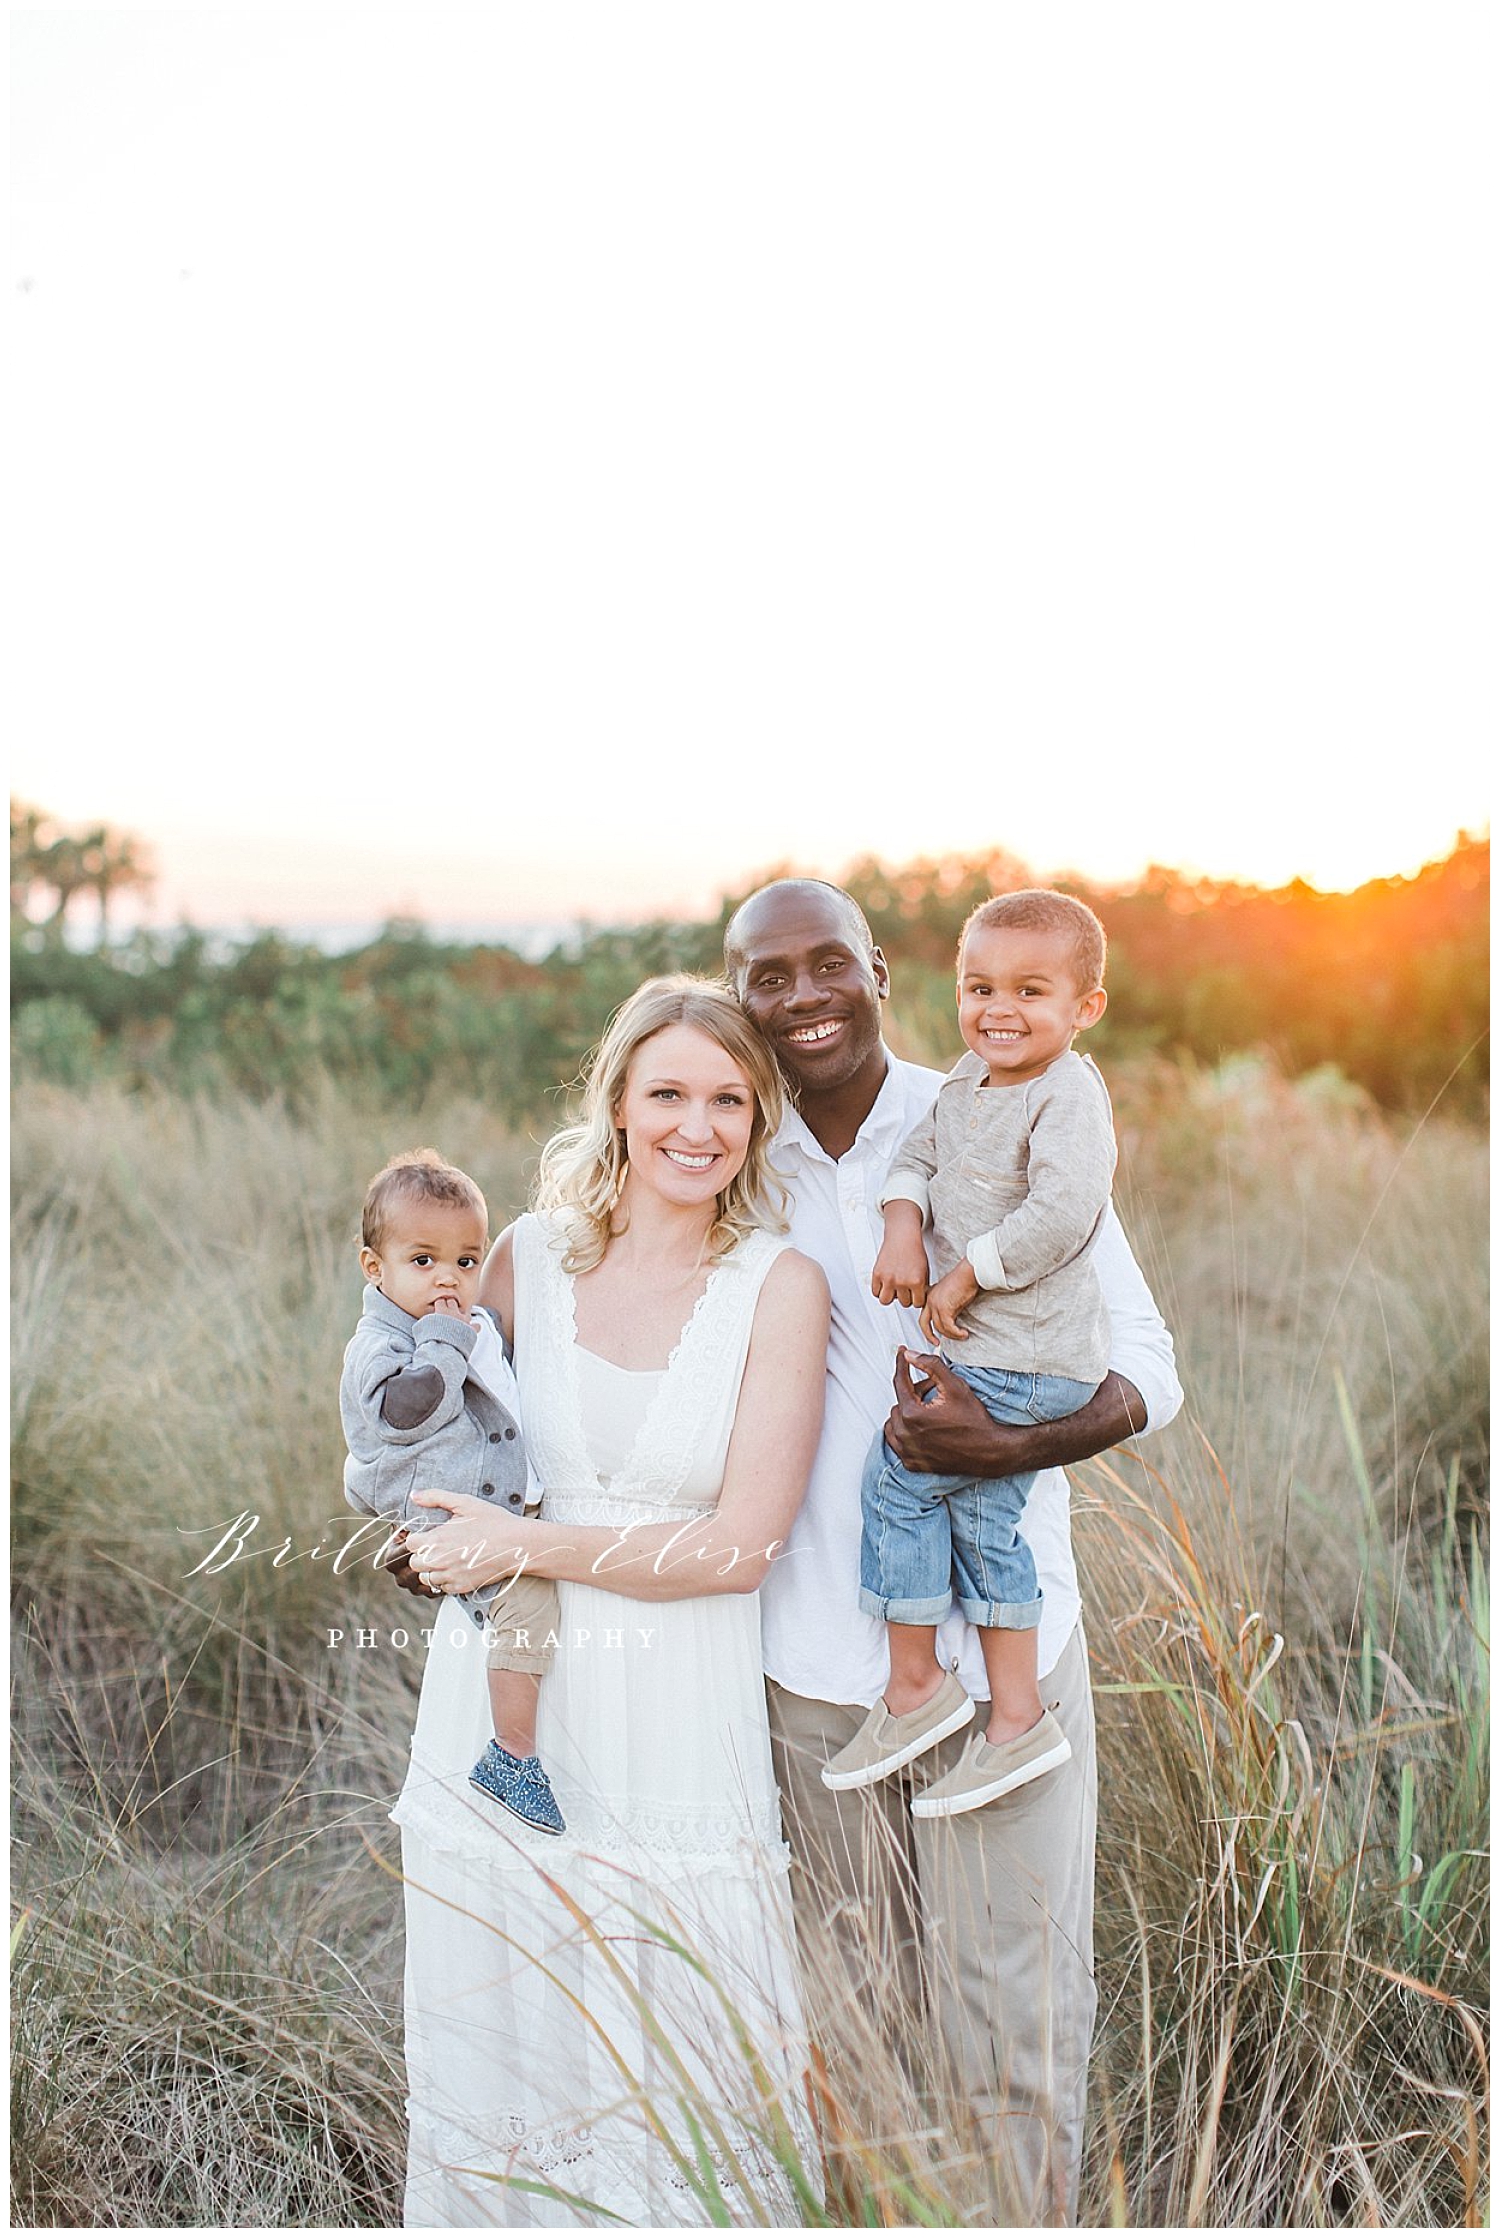 Tampa Family Sunset Feild and Beach Portrait Photography